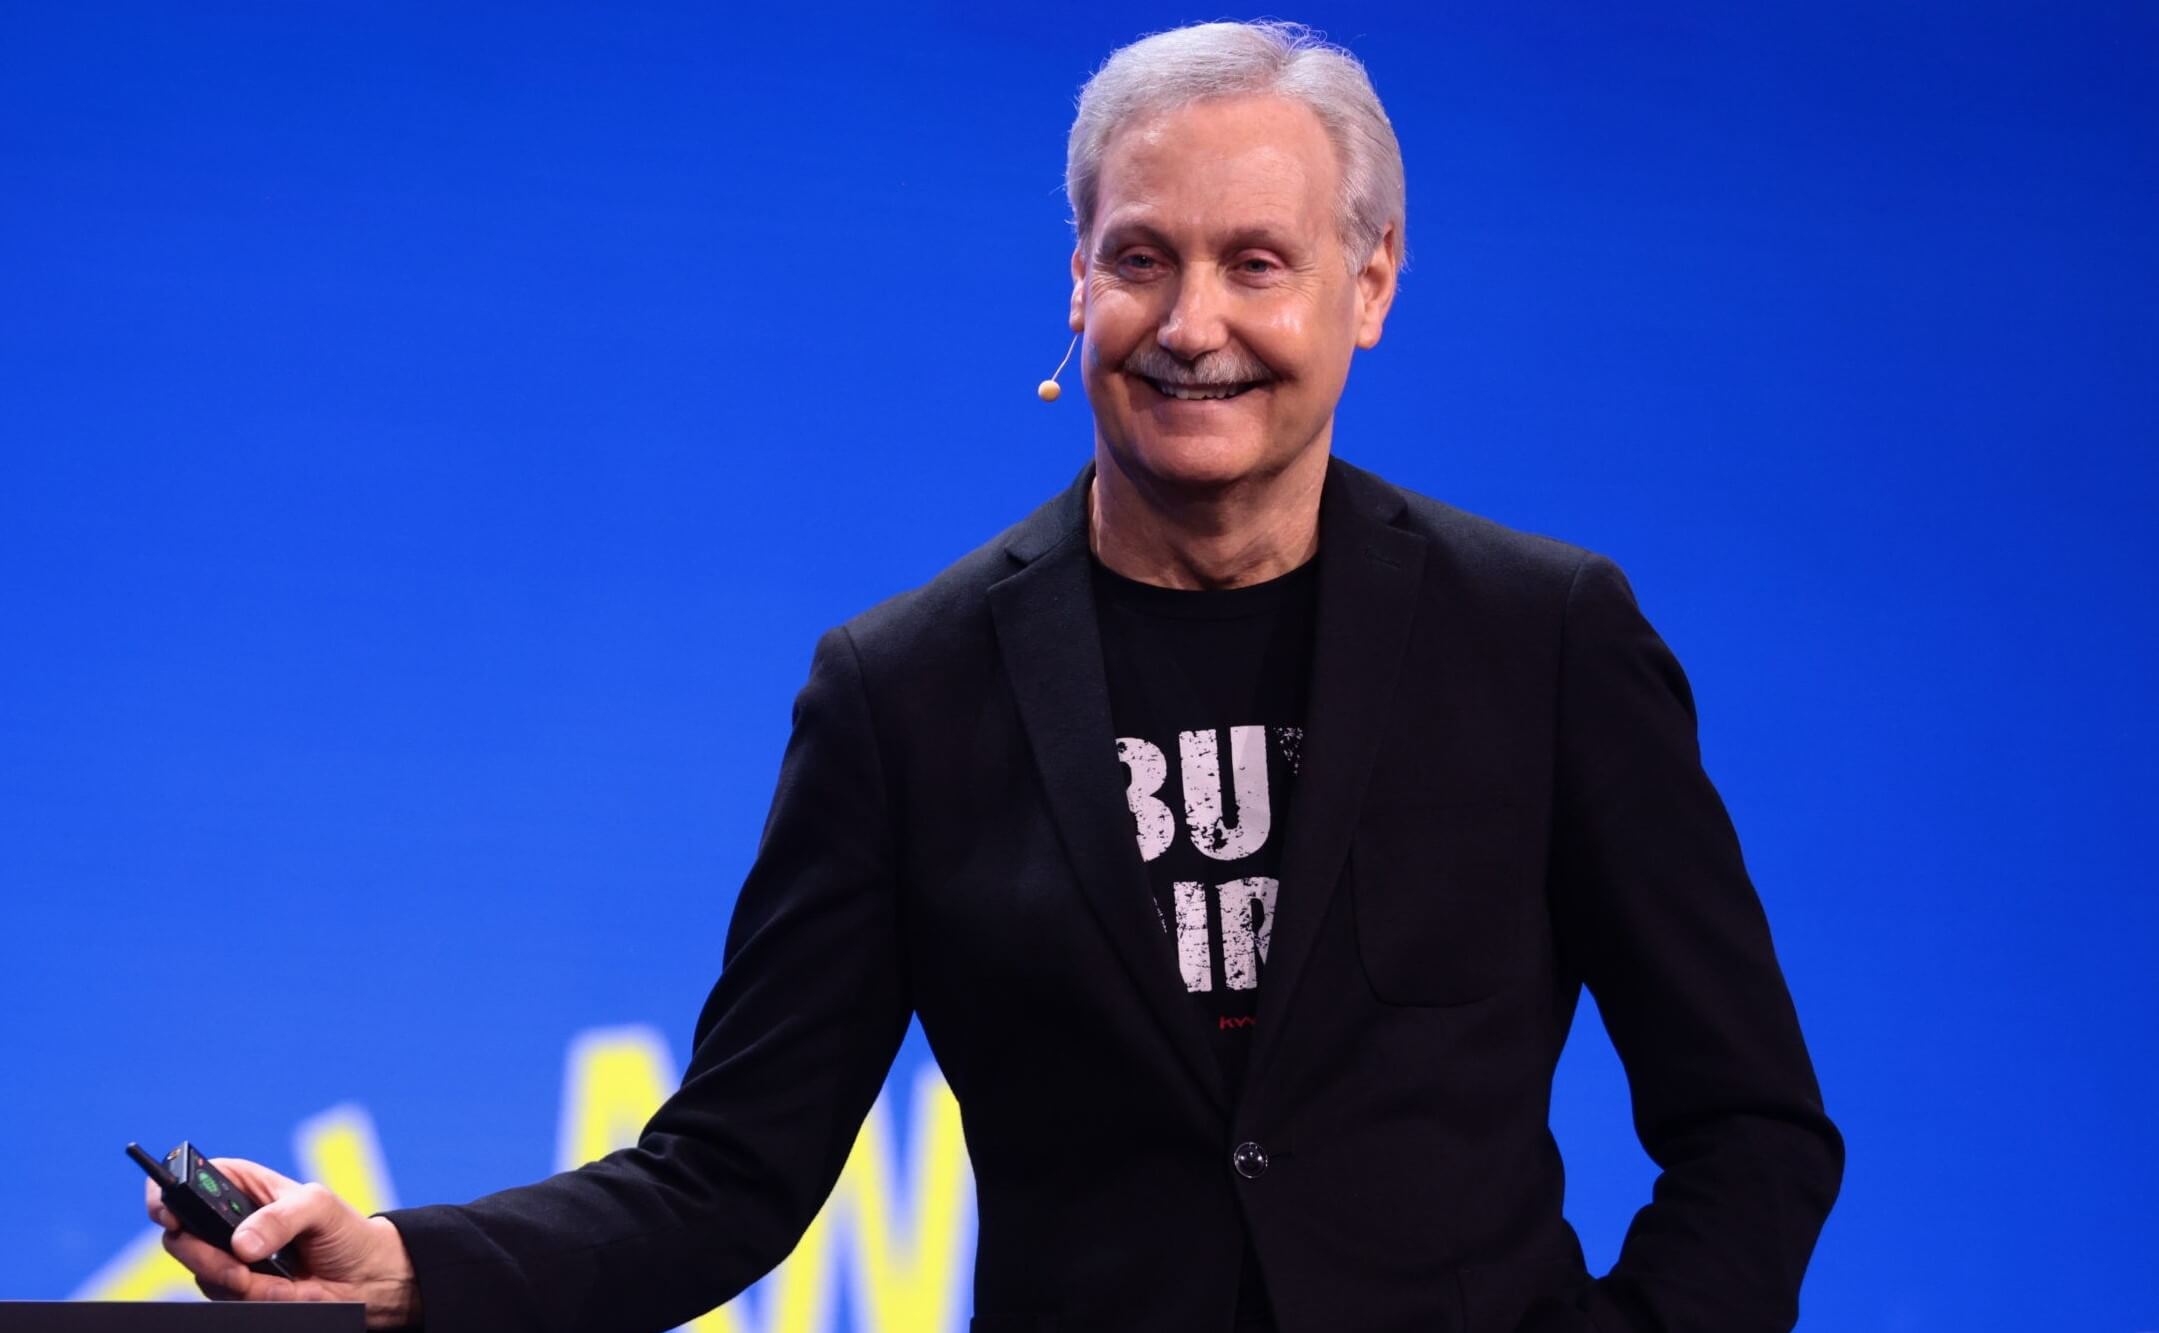 2002 Family Reunion Recap image featuring Gary Keller wearing a black jacket, black t-shirt, with short white hair, smiling, in front of a blue background.